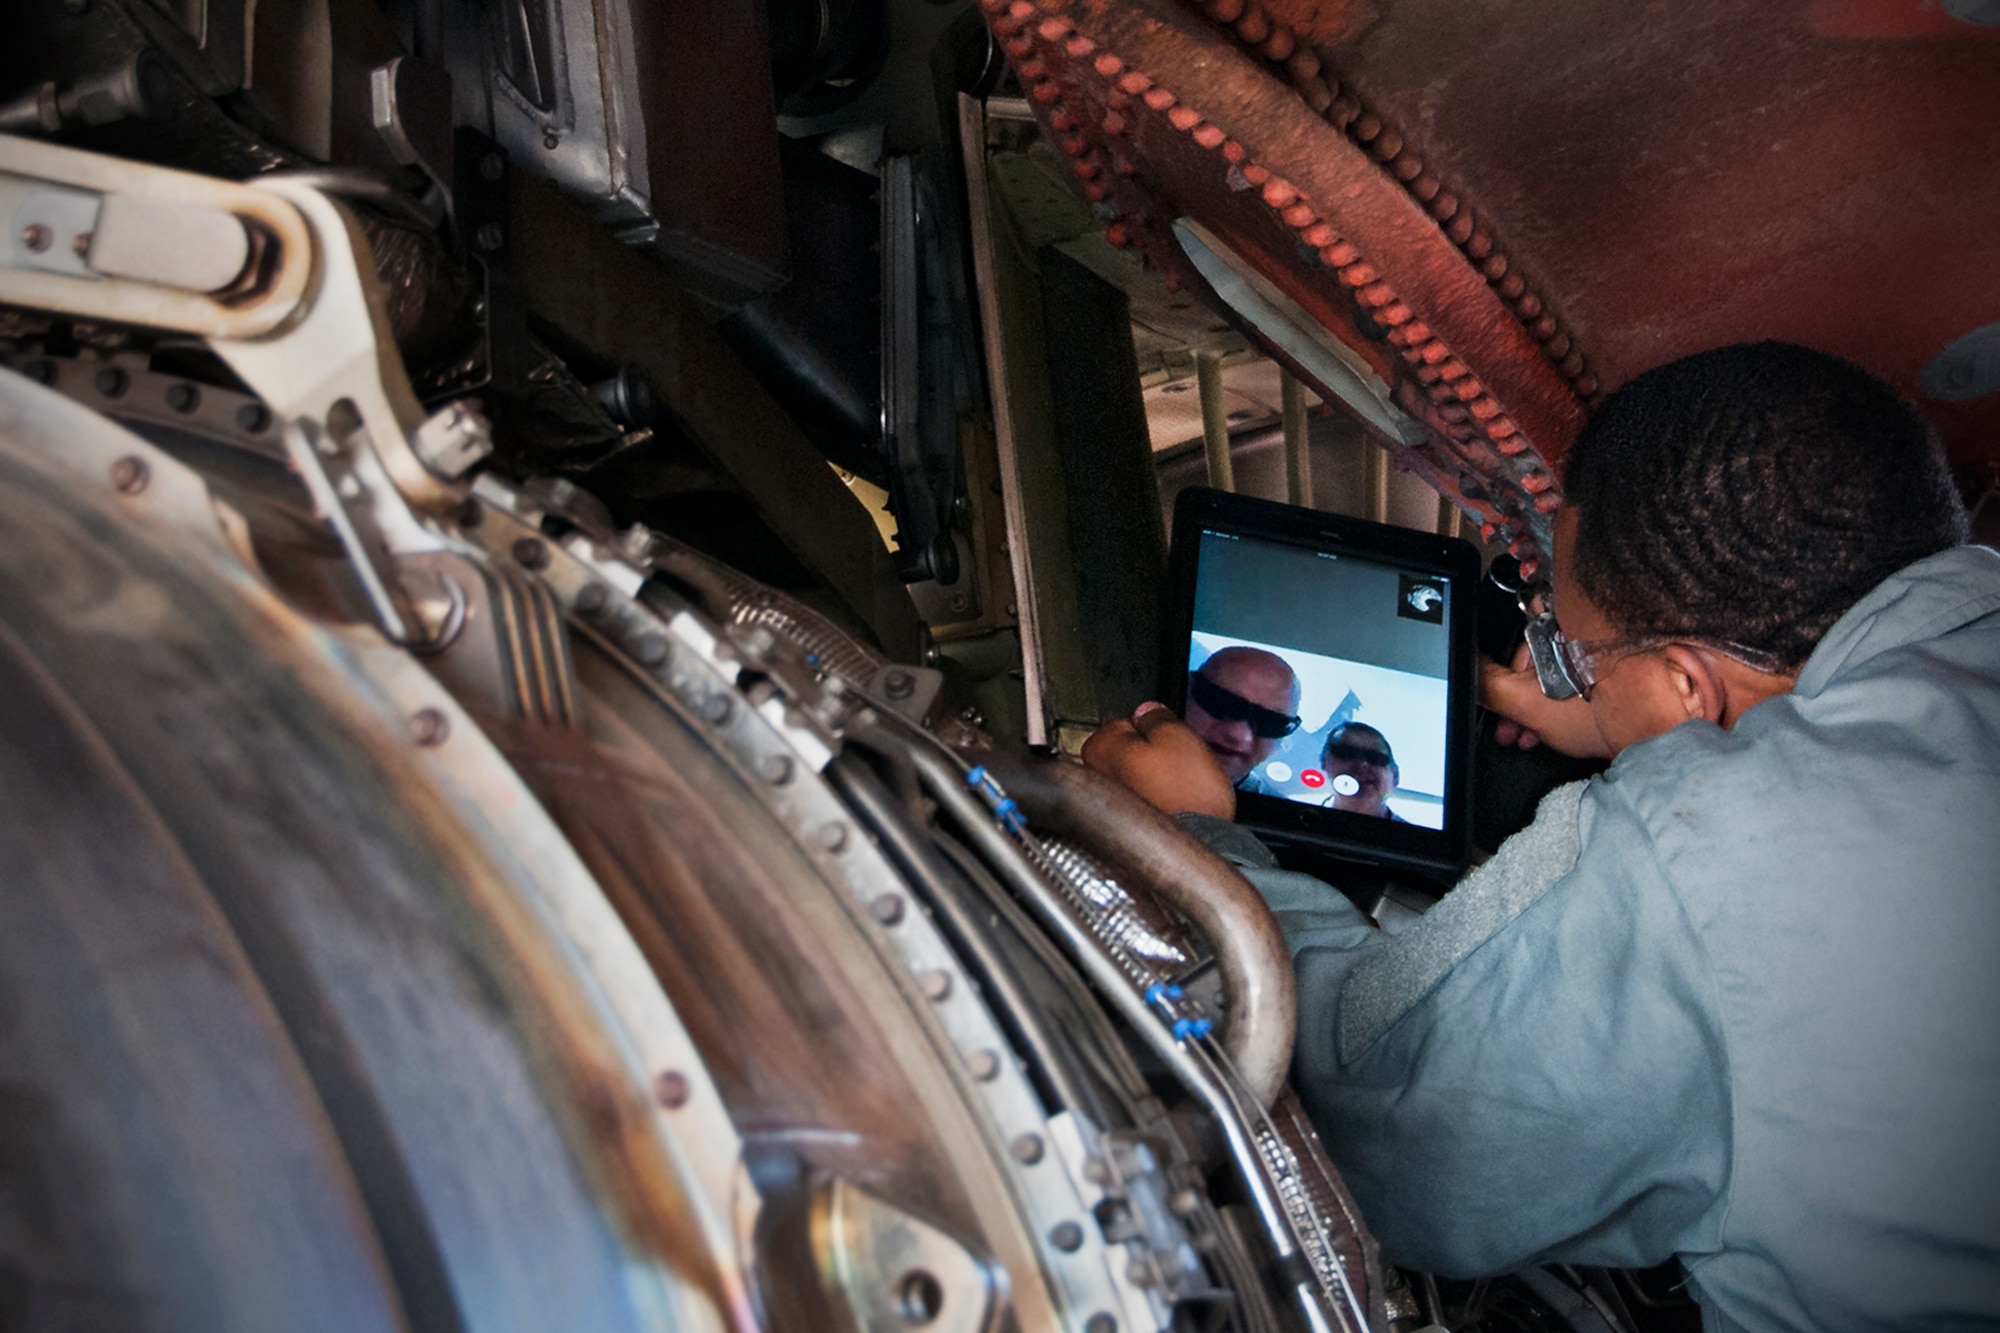 Technical Sgt. Tremain Strong, 459th Maintenance Group aerospace propulsion jet engine mechanic, shows an issue with a bleed on a KC-135R Stratotanker to his supervision via a tablet with video chat on the Joint Base Andrews, Md., flight line, May 26. Last week the 459th MXG obtained data connection on its tablets, which afforded access to communication applications such as instant messenger and video chat. This new capability allows maintainers to send imagery, instantly reach the shop or supervision, as well as discuss repair issues from separate locations in real-time through video stream. (U.S. Air Force photo/ Staff Sgt. Kat Justen)